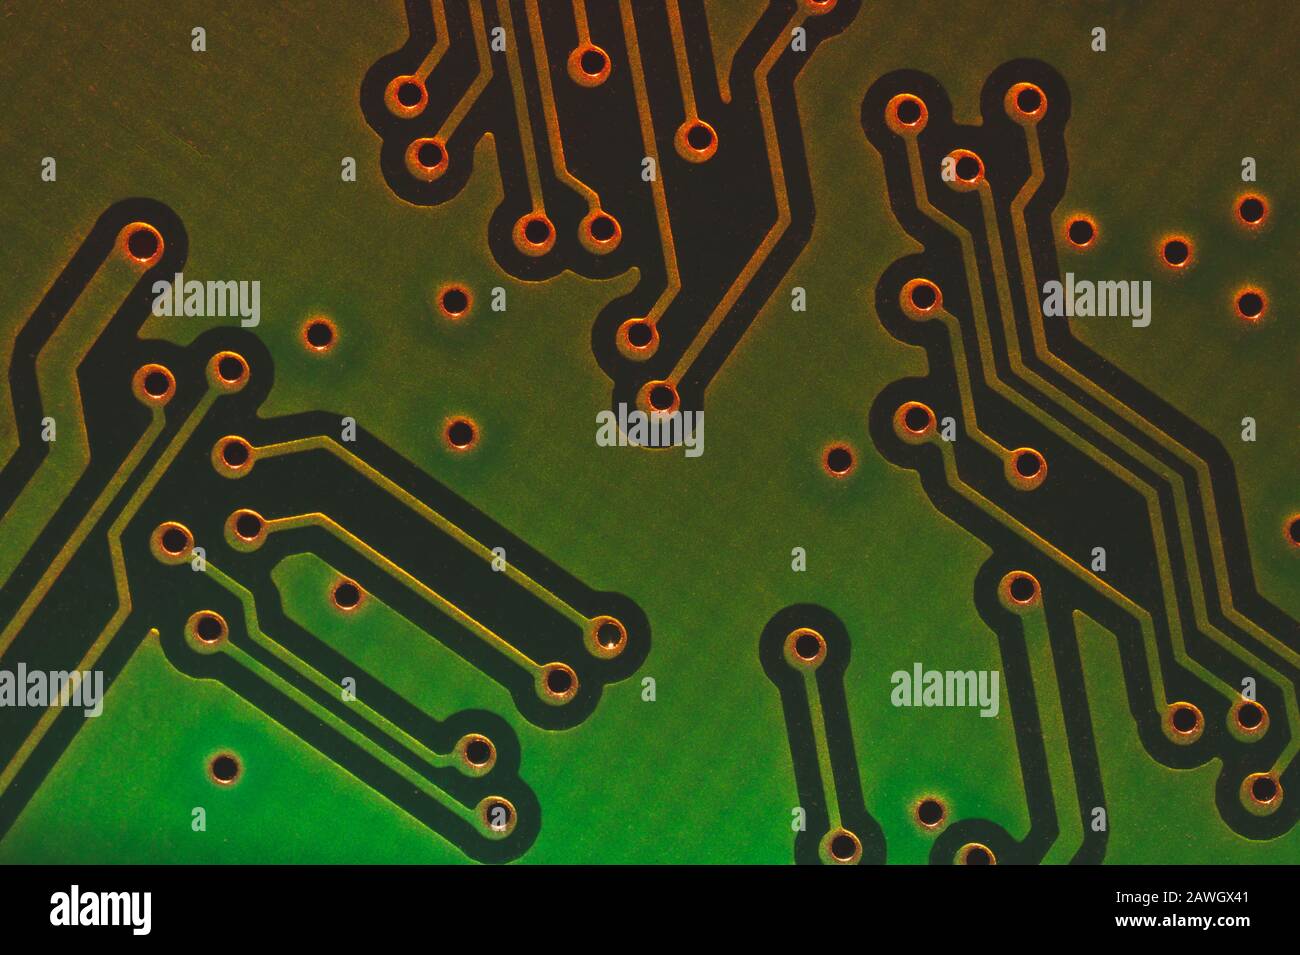 Electronic circuit board abstract background. computer motherboard close up. modern technologies. micro elements of computer with connections and trac Stock Photo